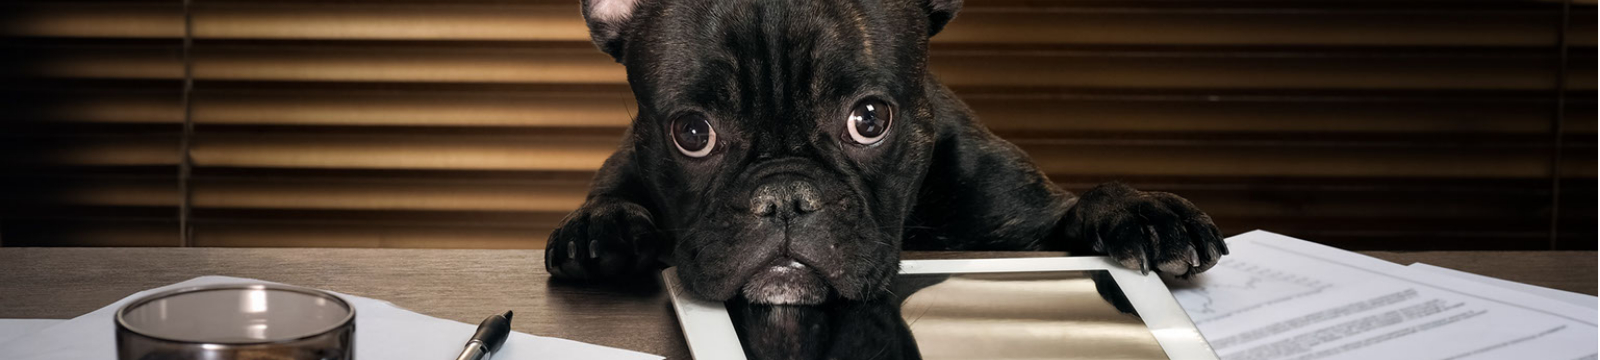 French bulldog with chin on tablet.